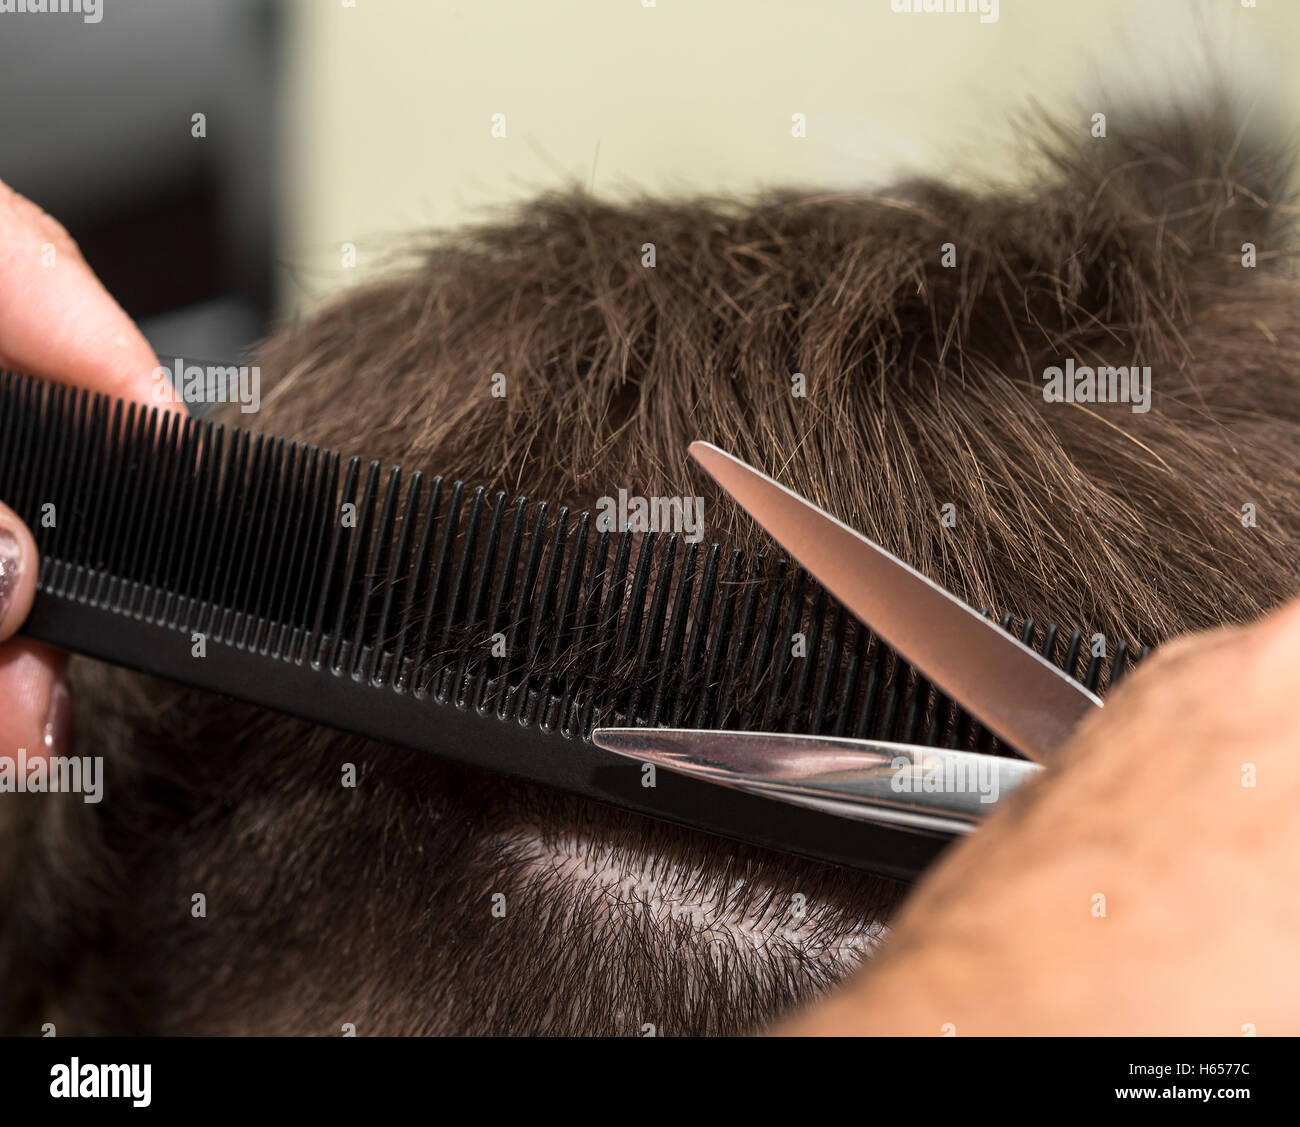 At the hairdresser getting a new male haircut. Stock Photo